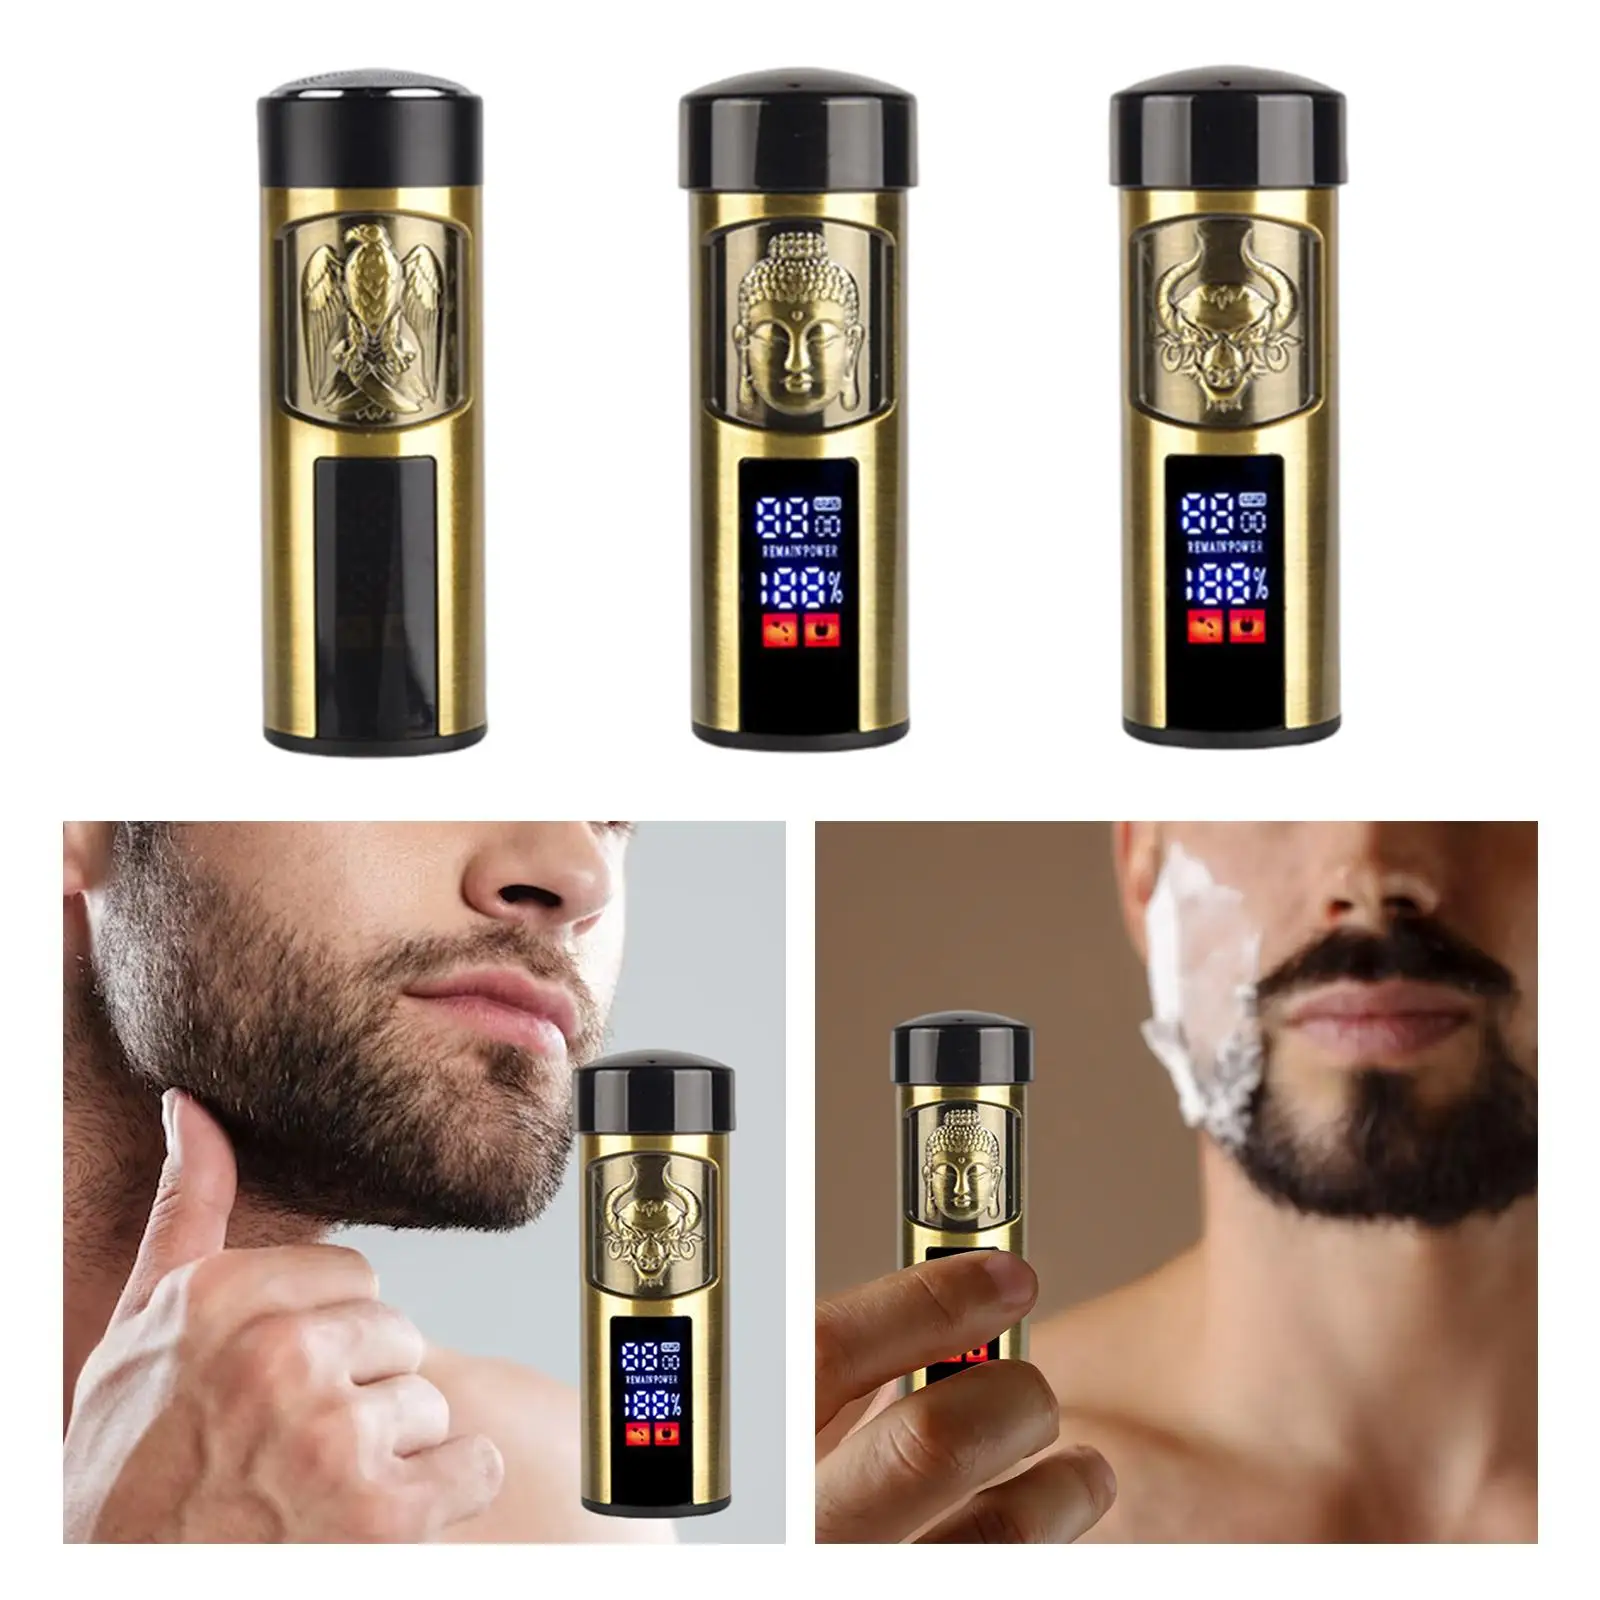 Men Electric Shaver Silent Digital Display Pocket Size USB Rechargeable Facial Beard Trimmer Portable Electric Shaver for Travel